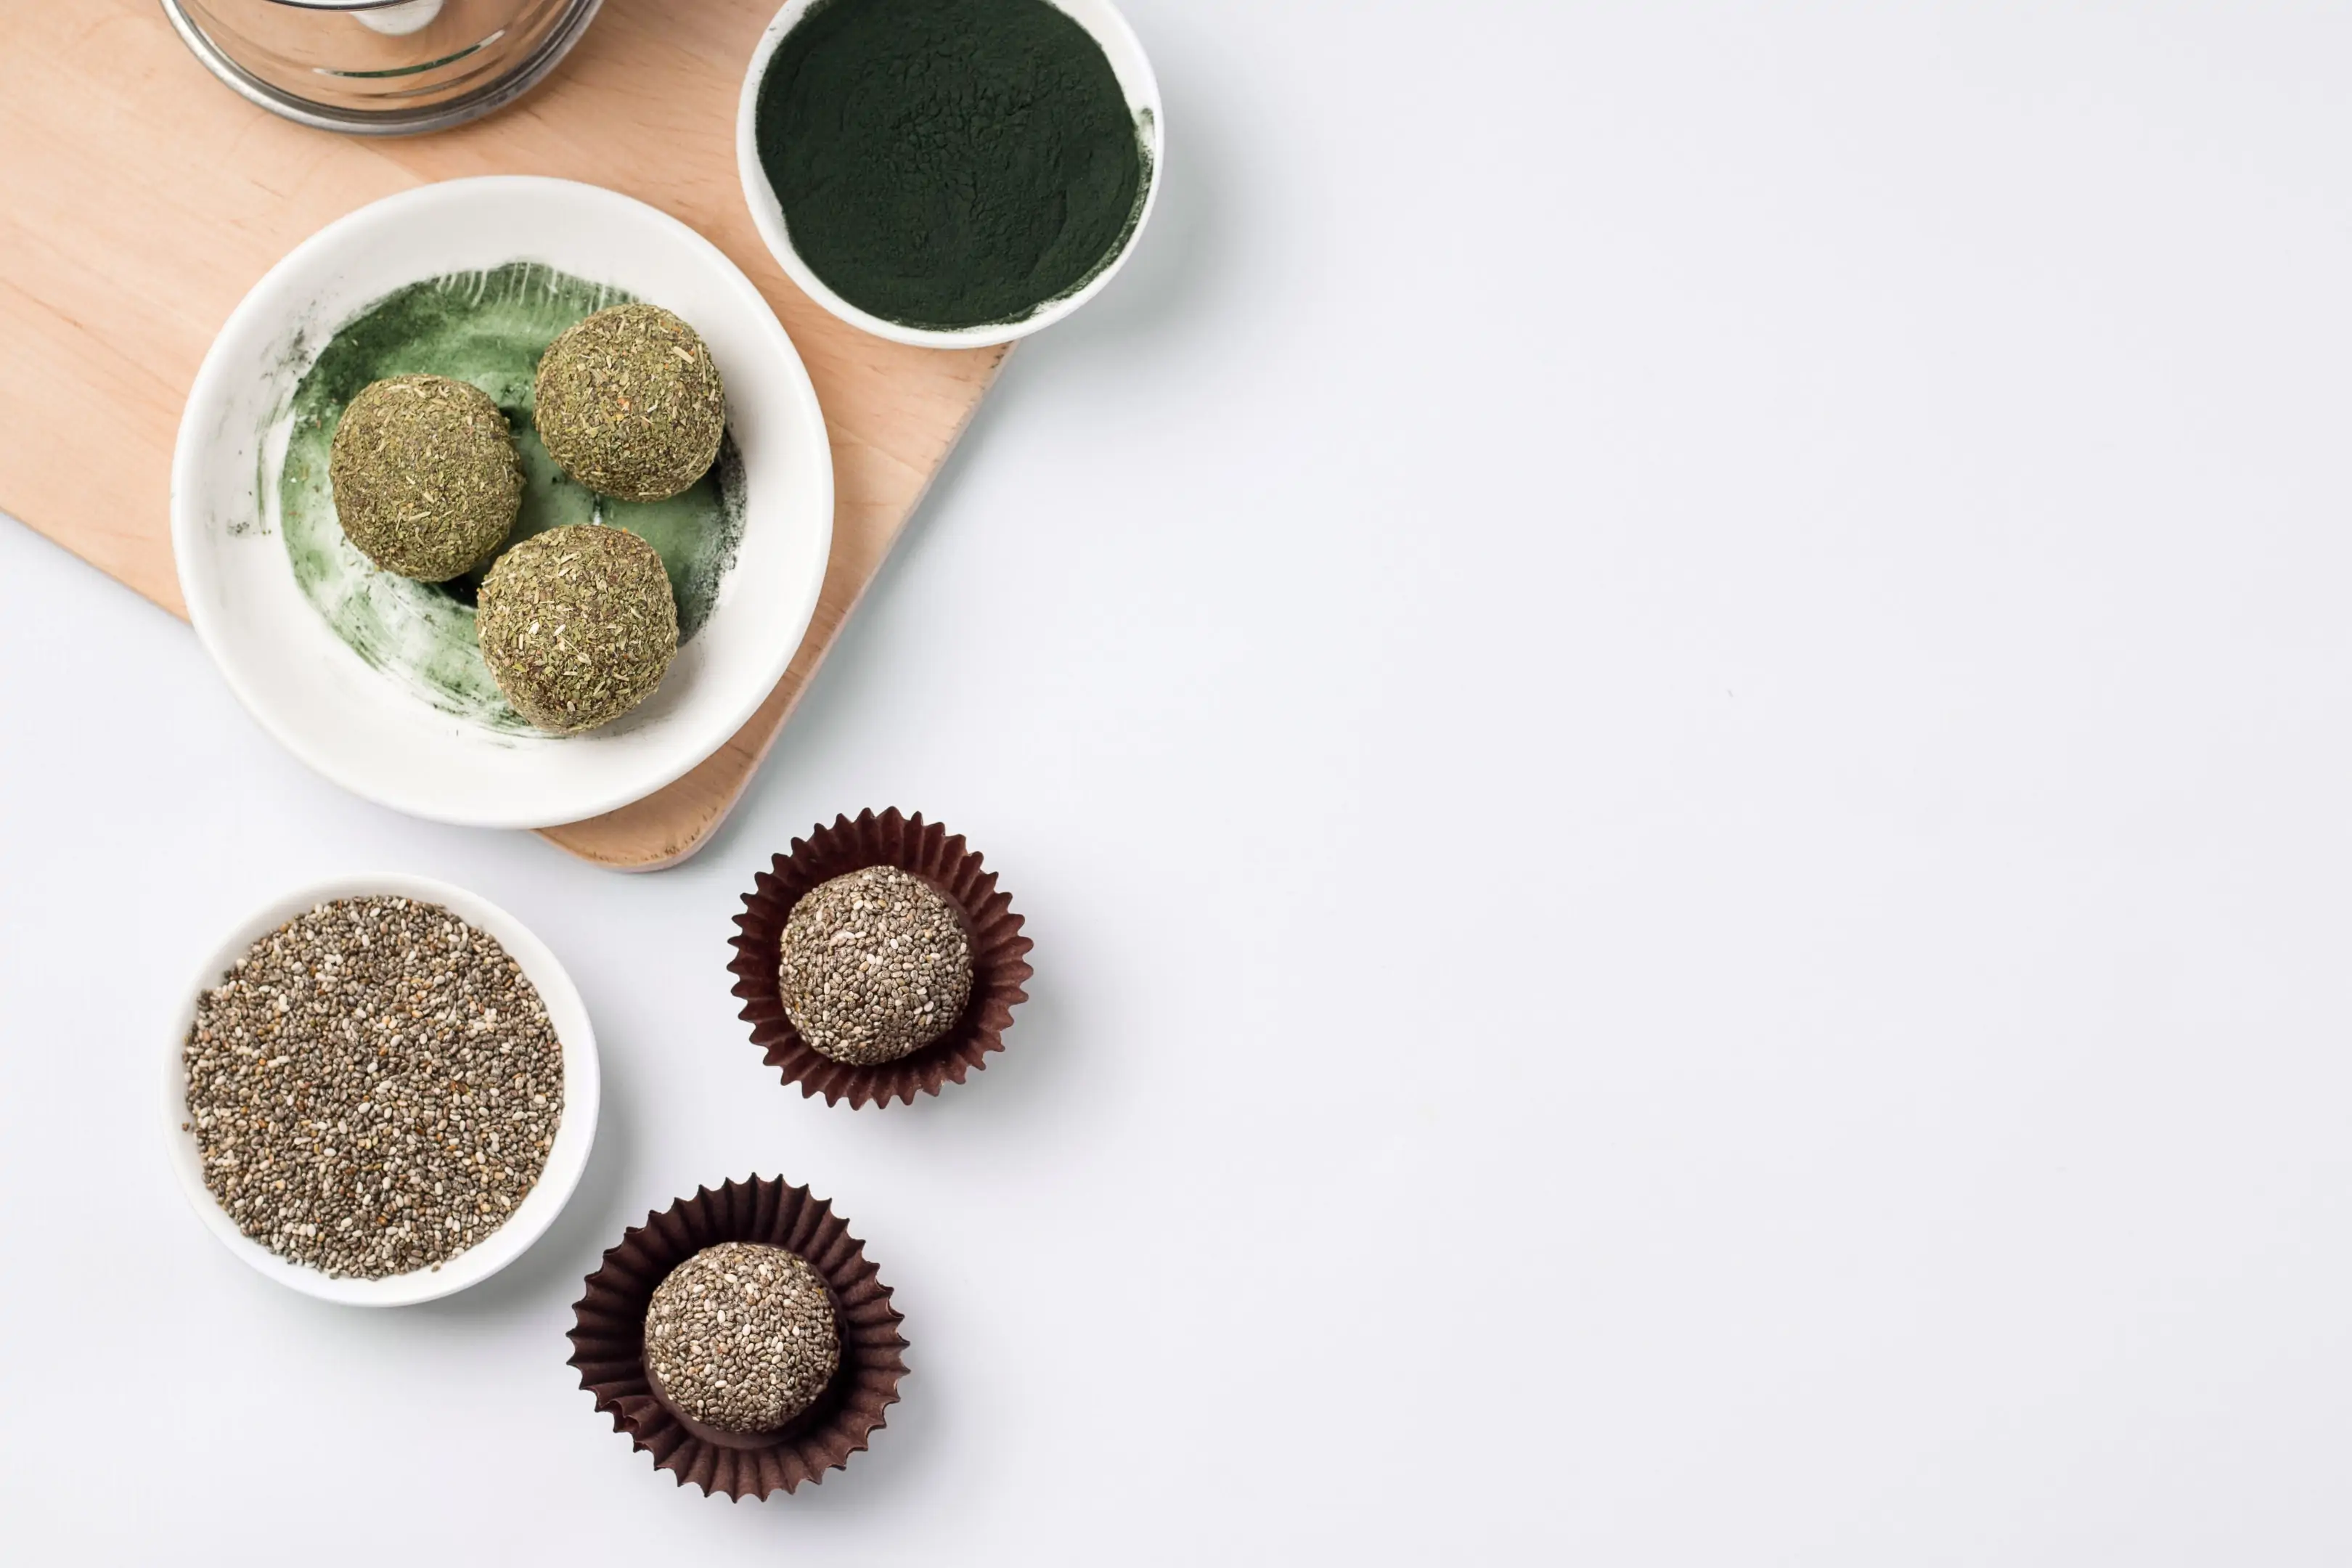 Energy balls of dried fruits with spirulina and chia seeds